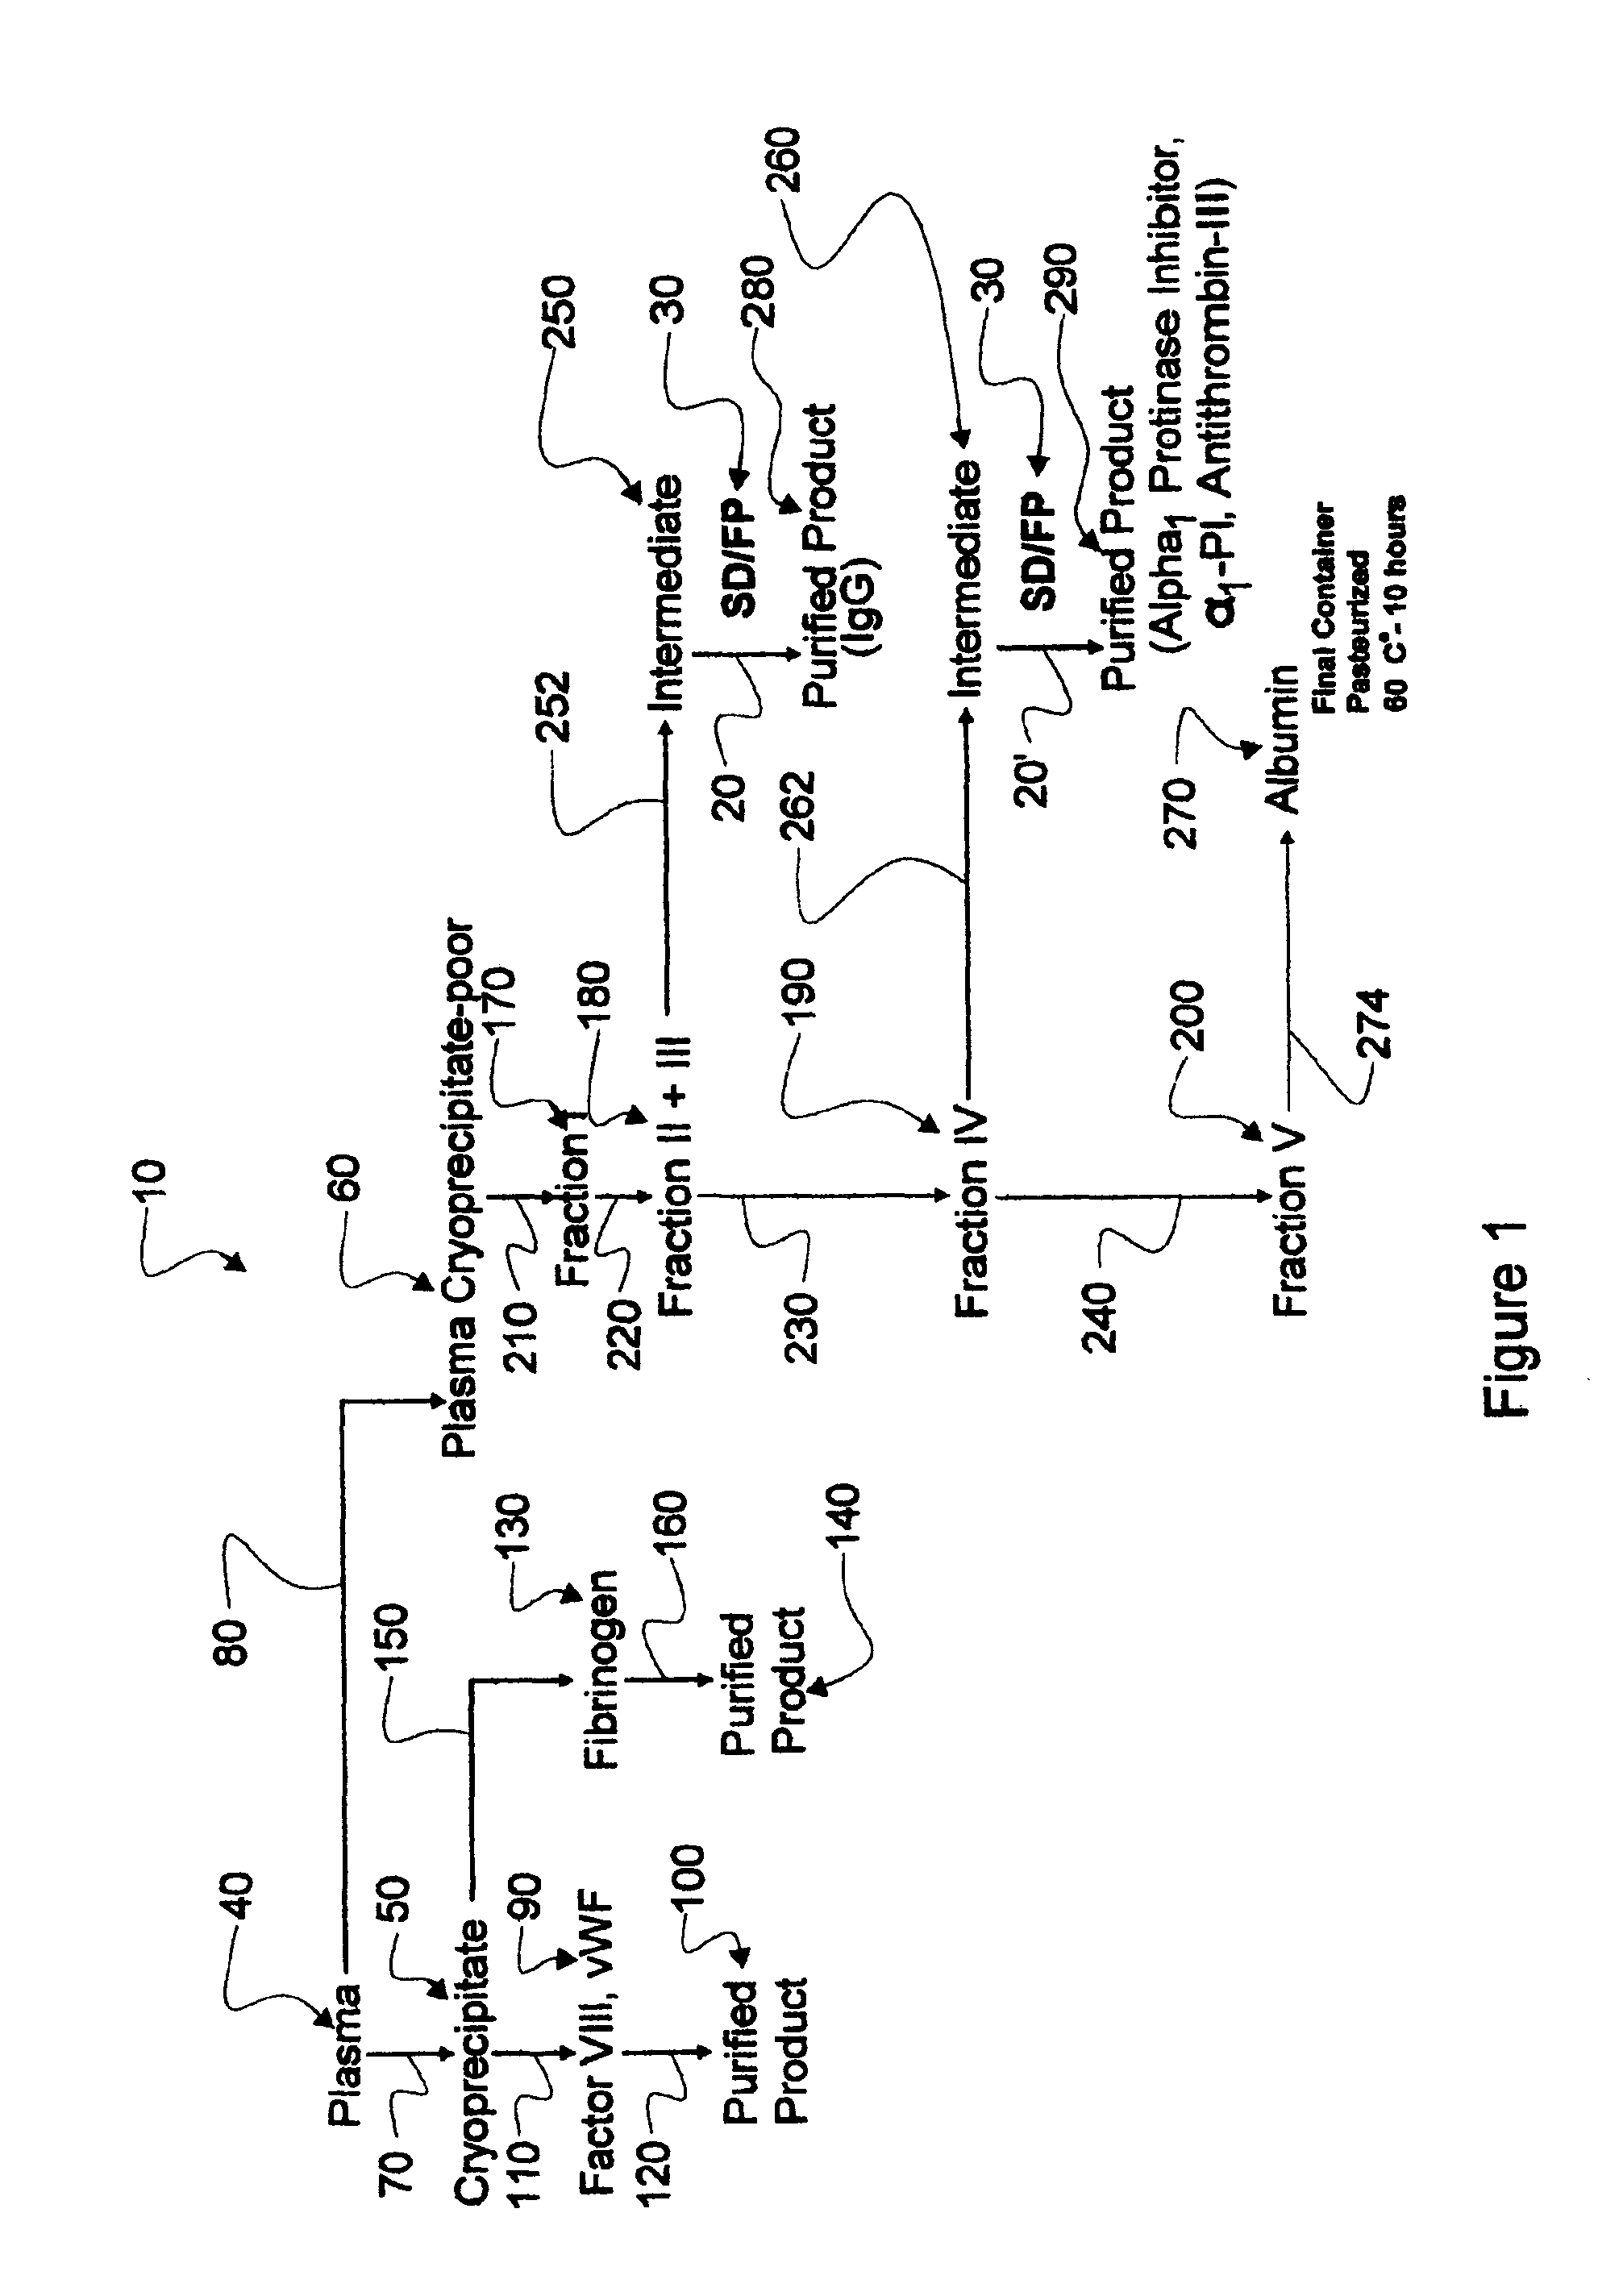 Augmented solvent/detergent method for inactivating enveloped and non-enveloped viruses